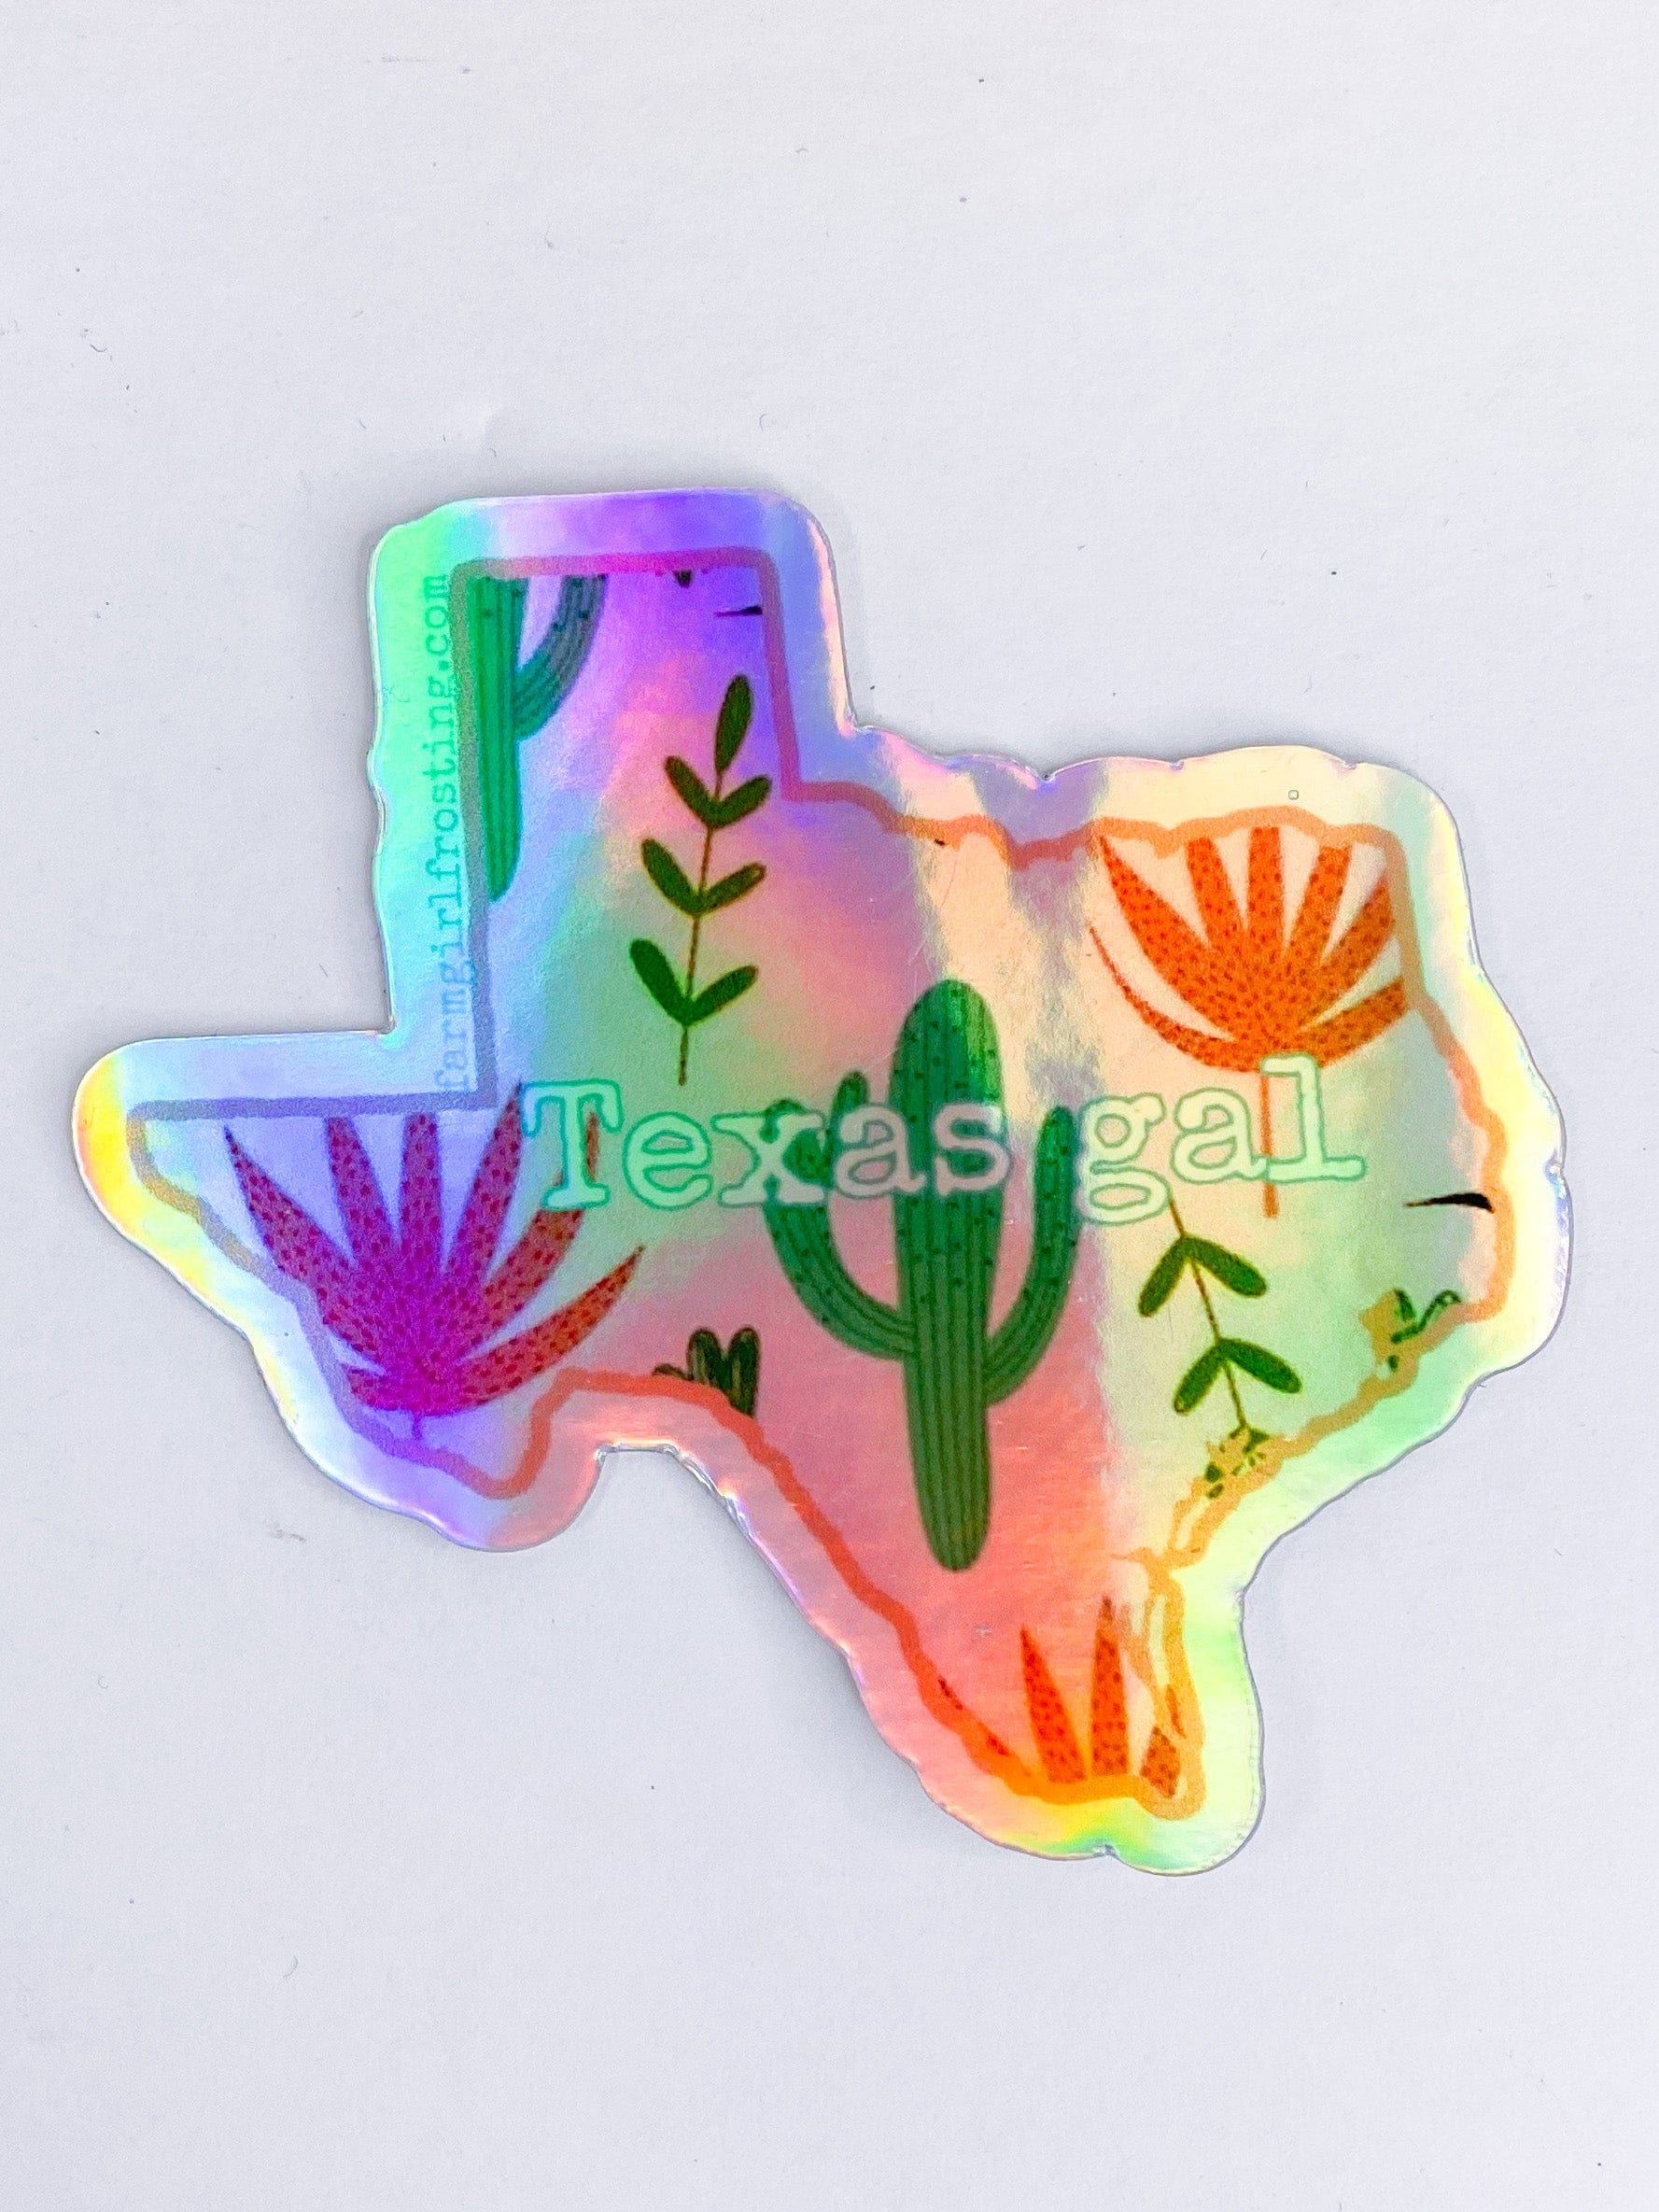 Other Goodies Fun Vinyl Stickers Holographic Texas Gal